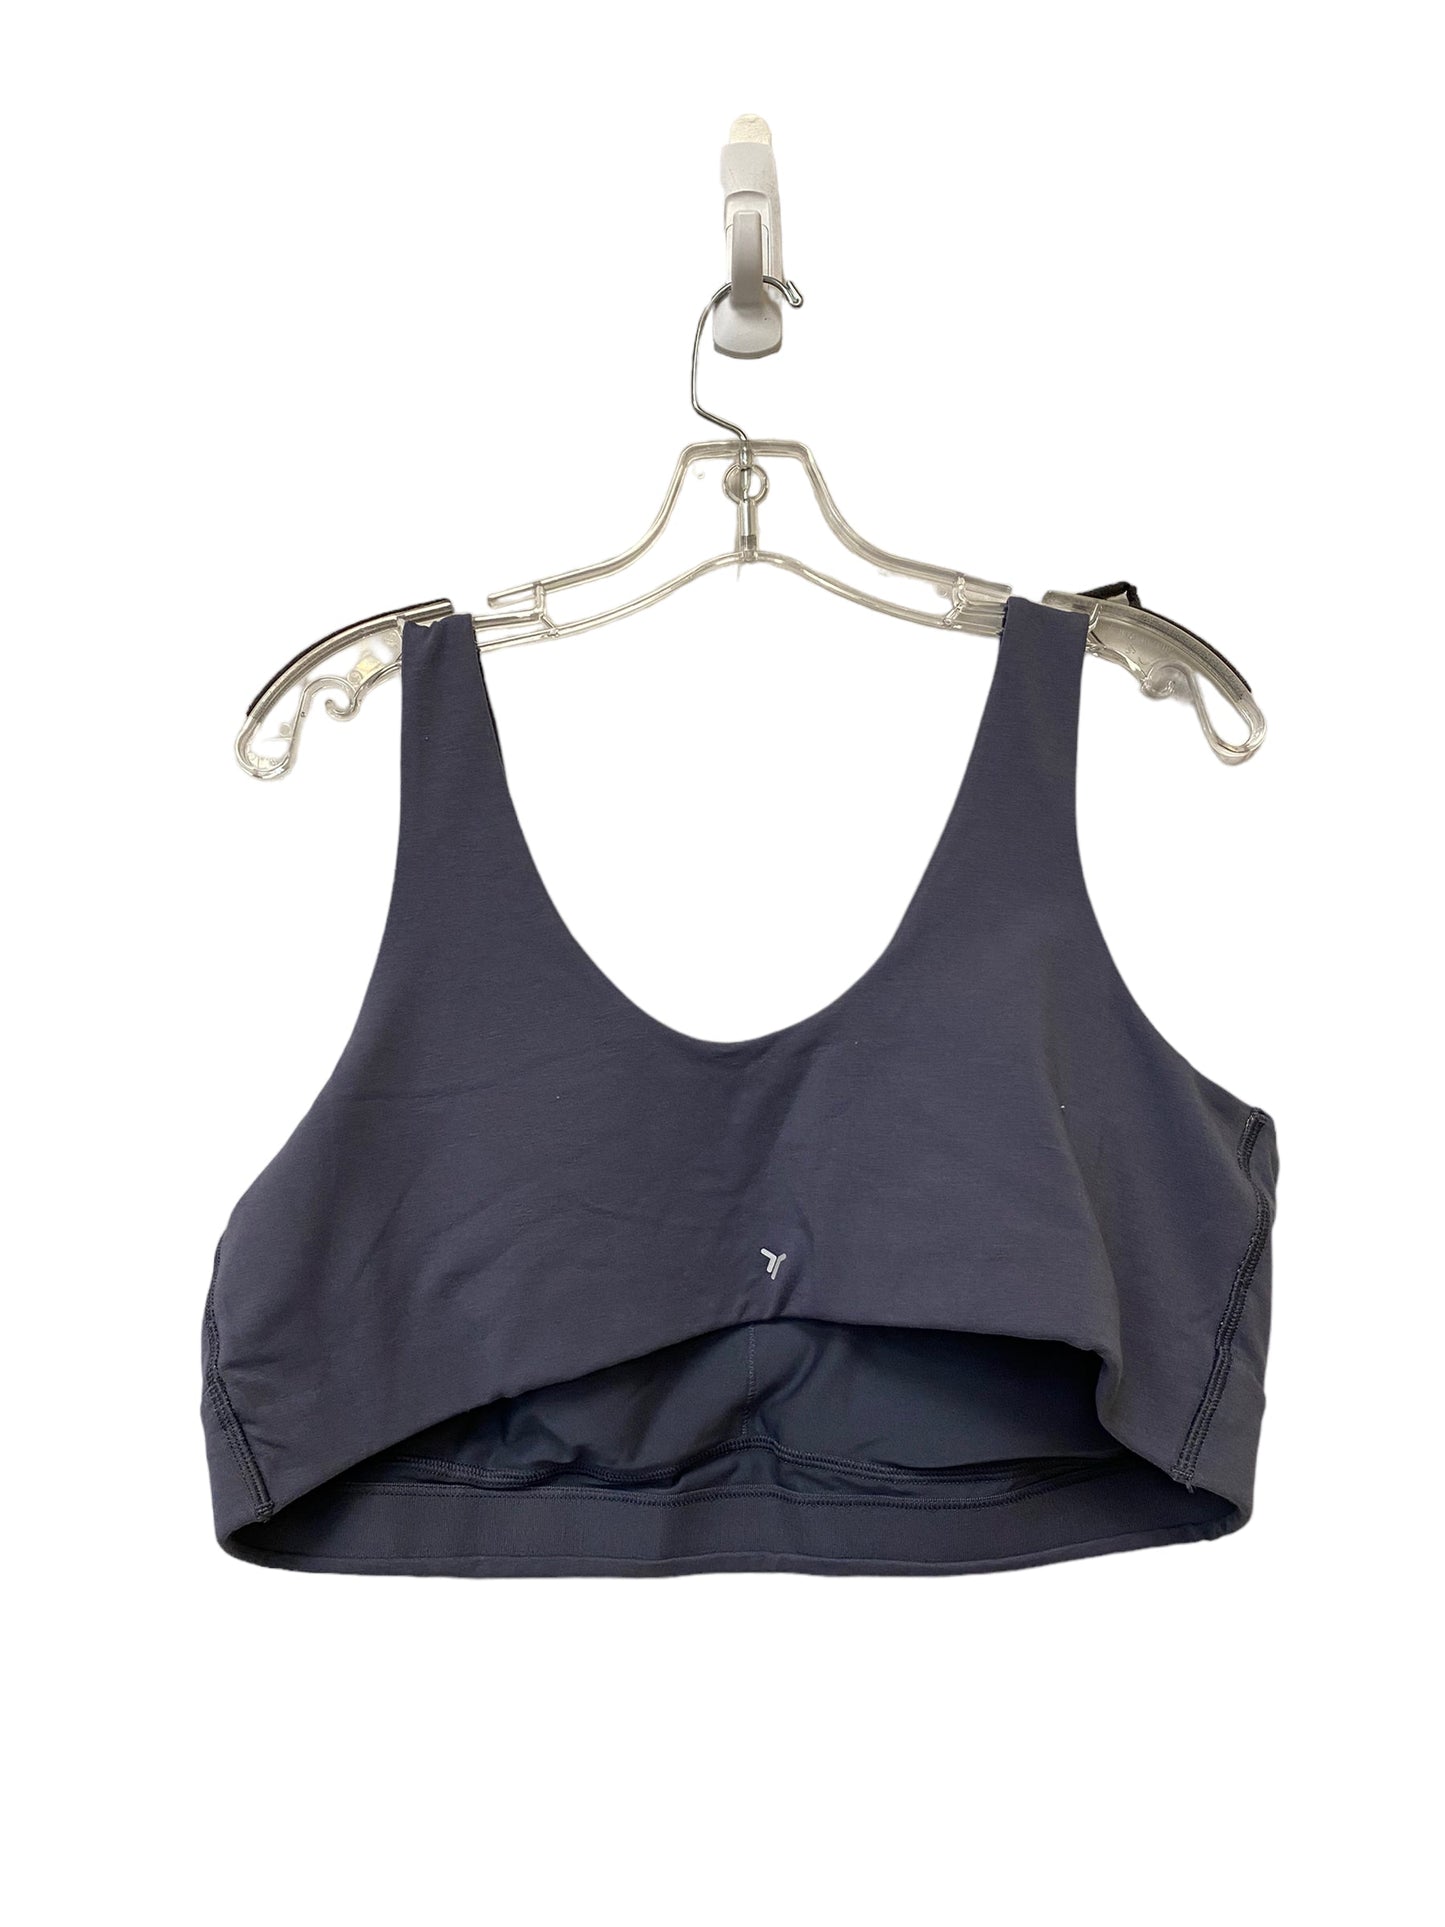 Athletic Bra By Old Navy  Size: 2x